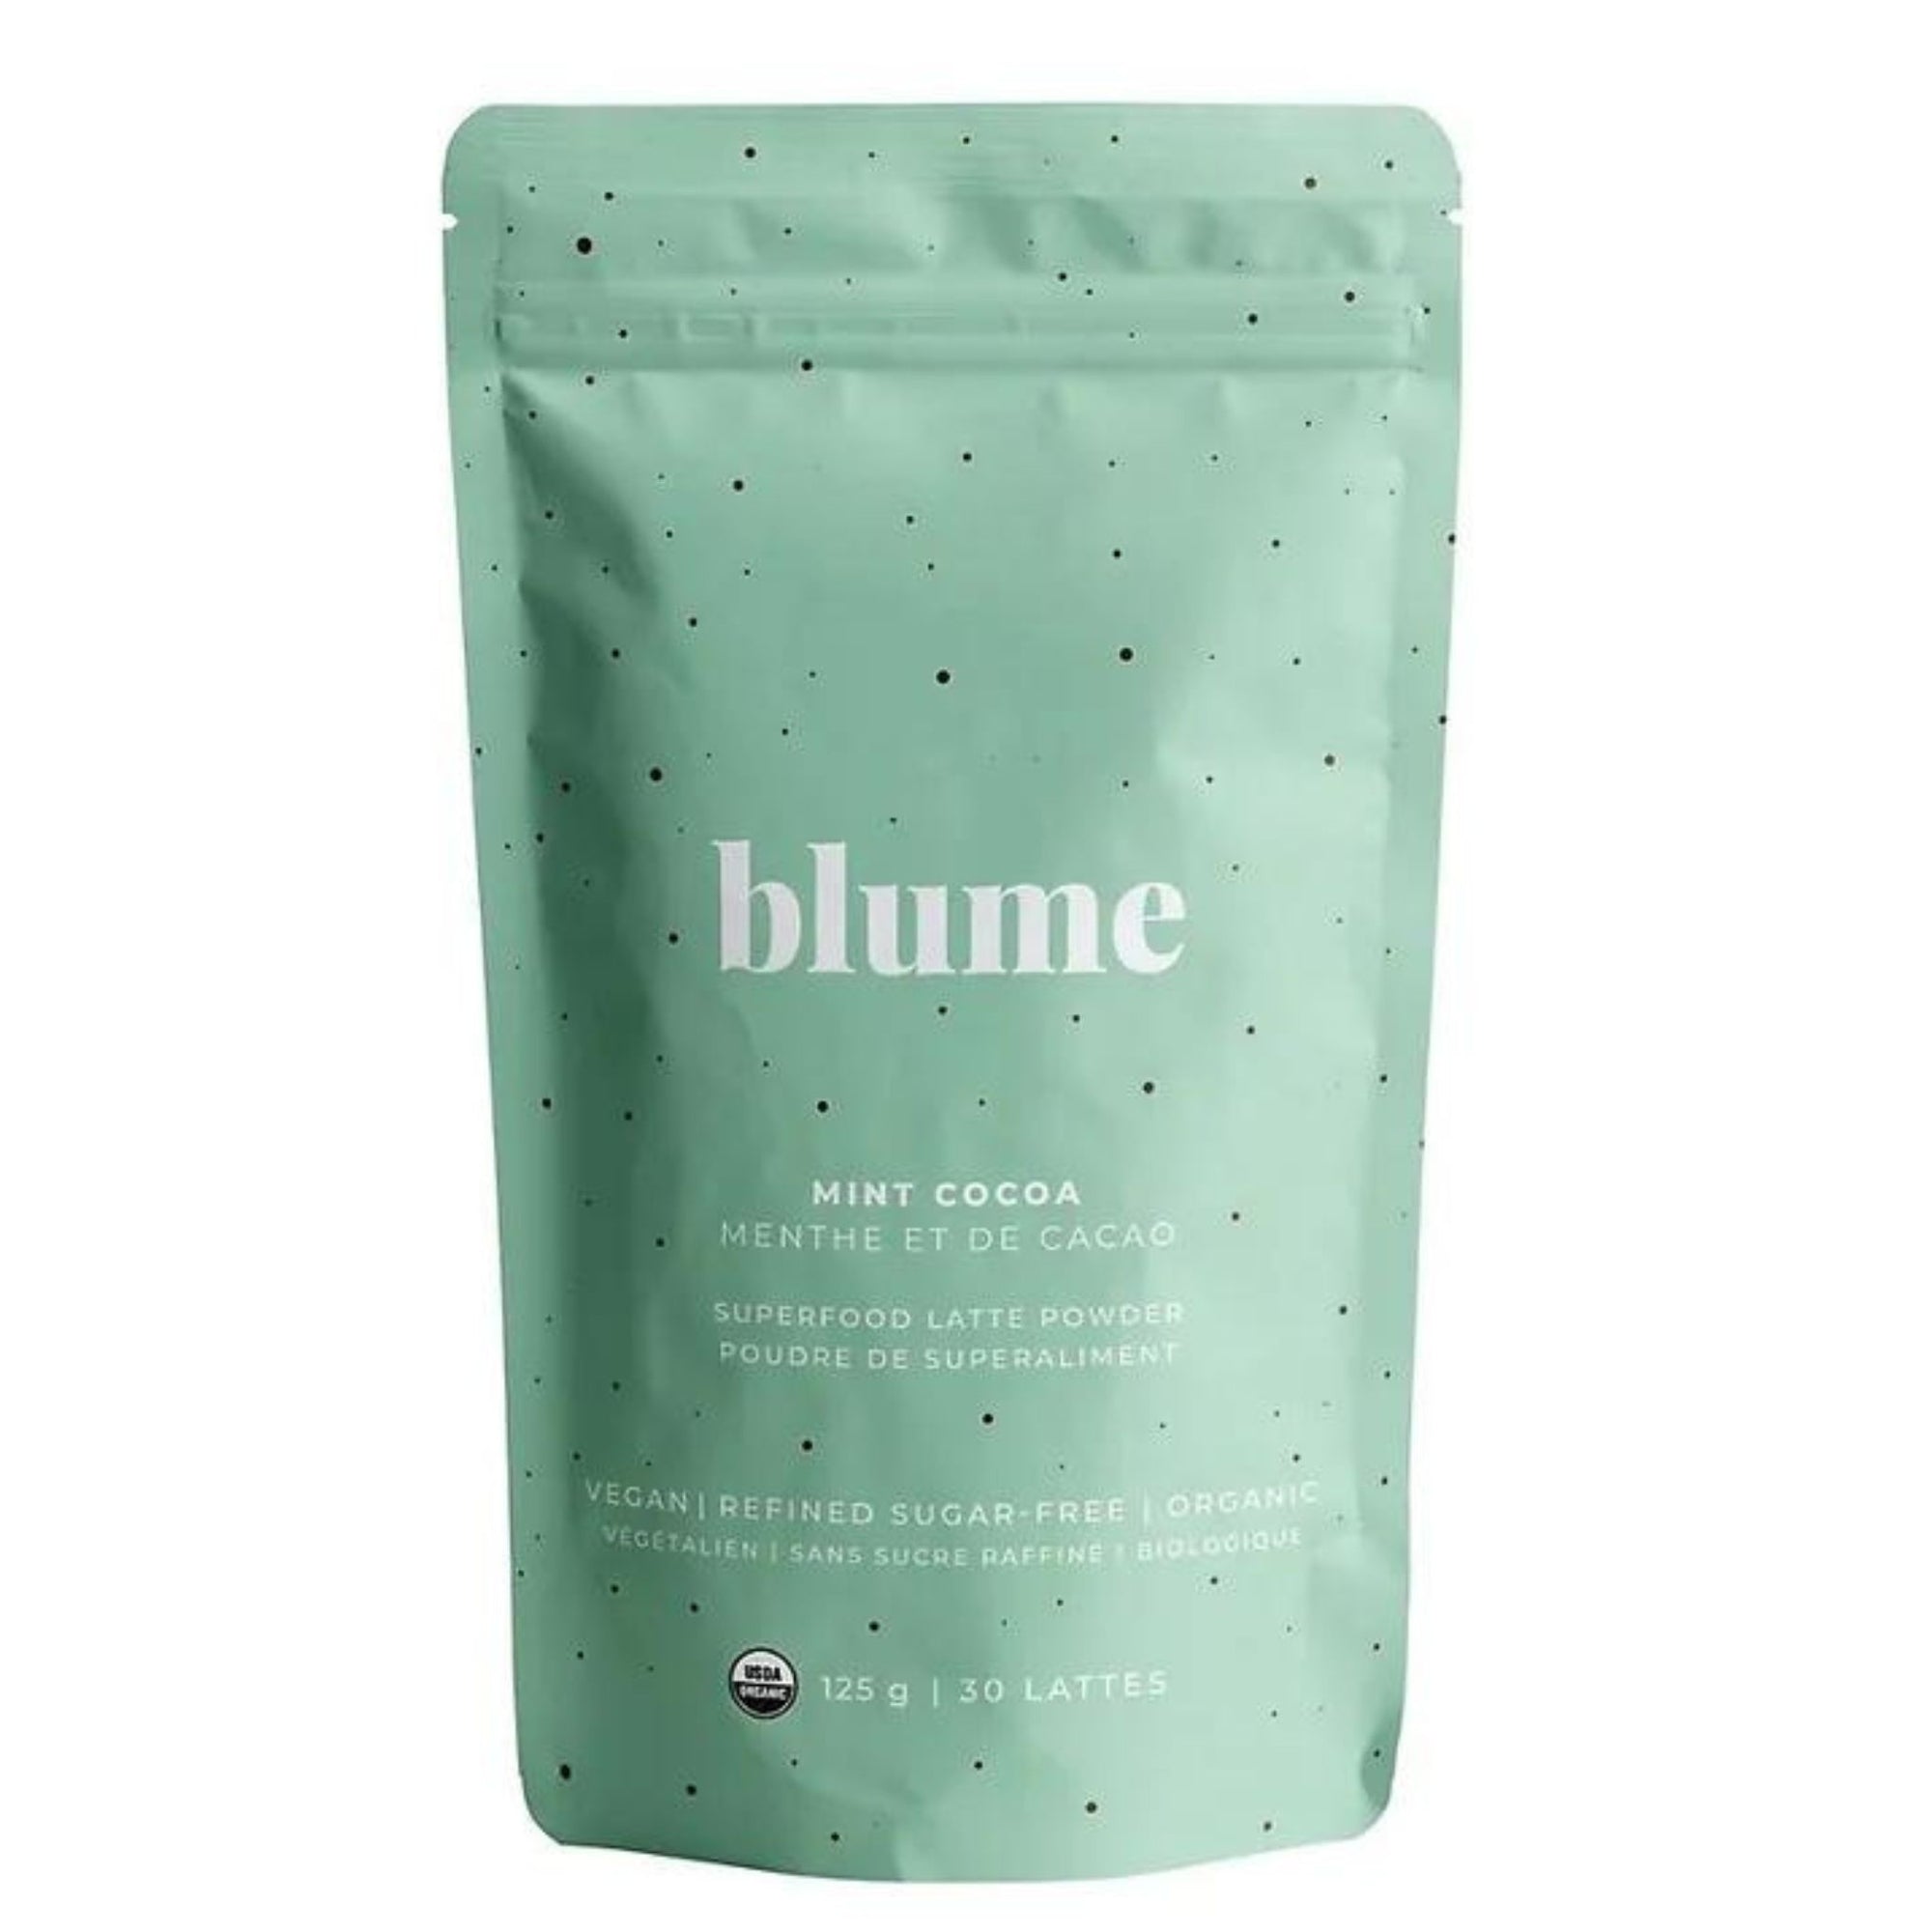 blume Mint Cocoa Blend Superfood Latte 125g